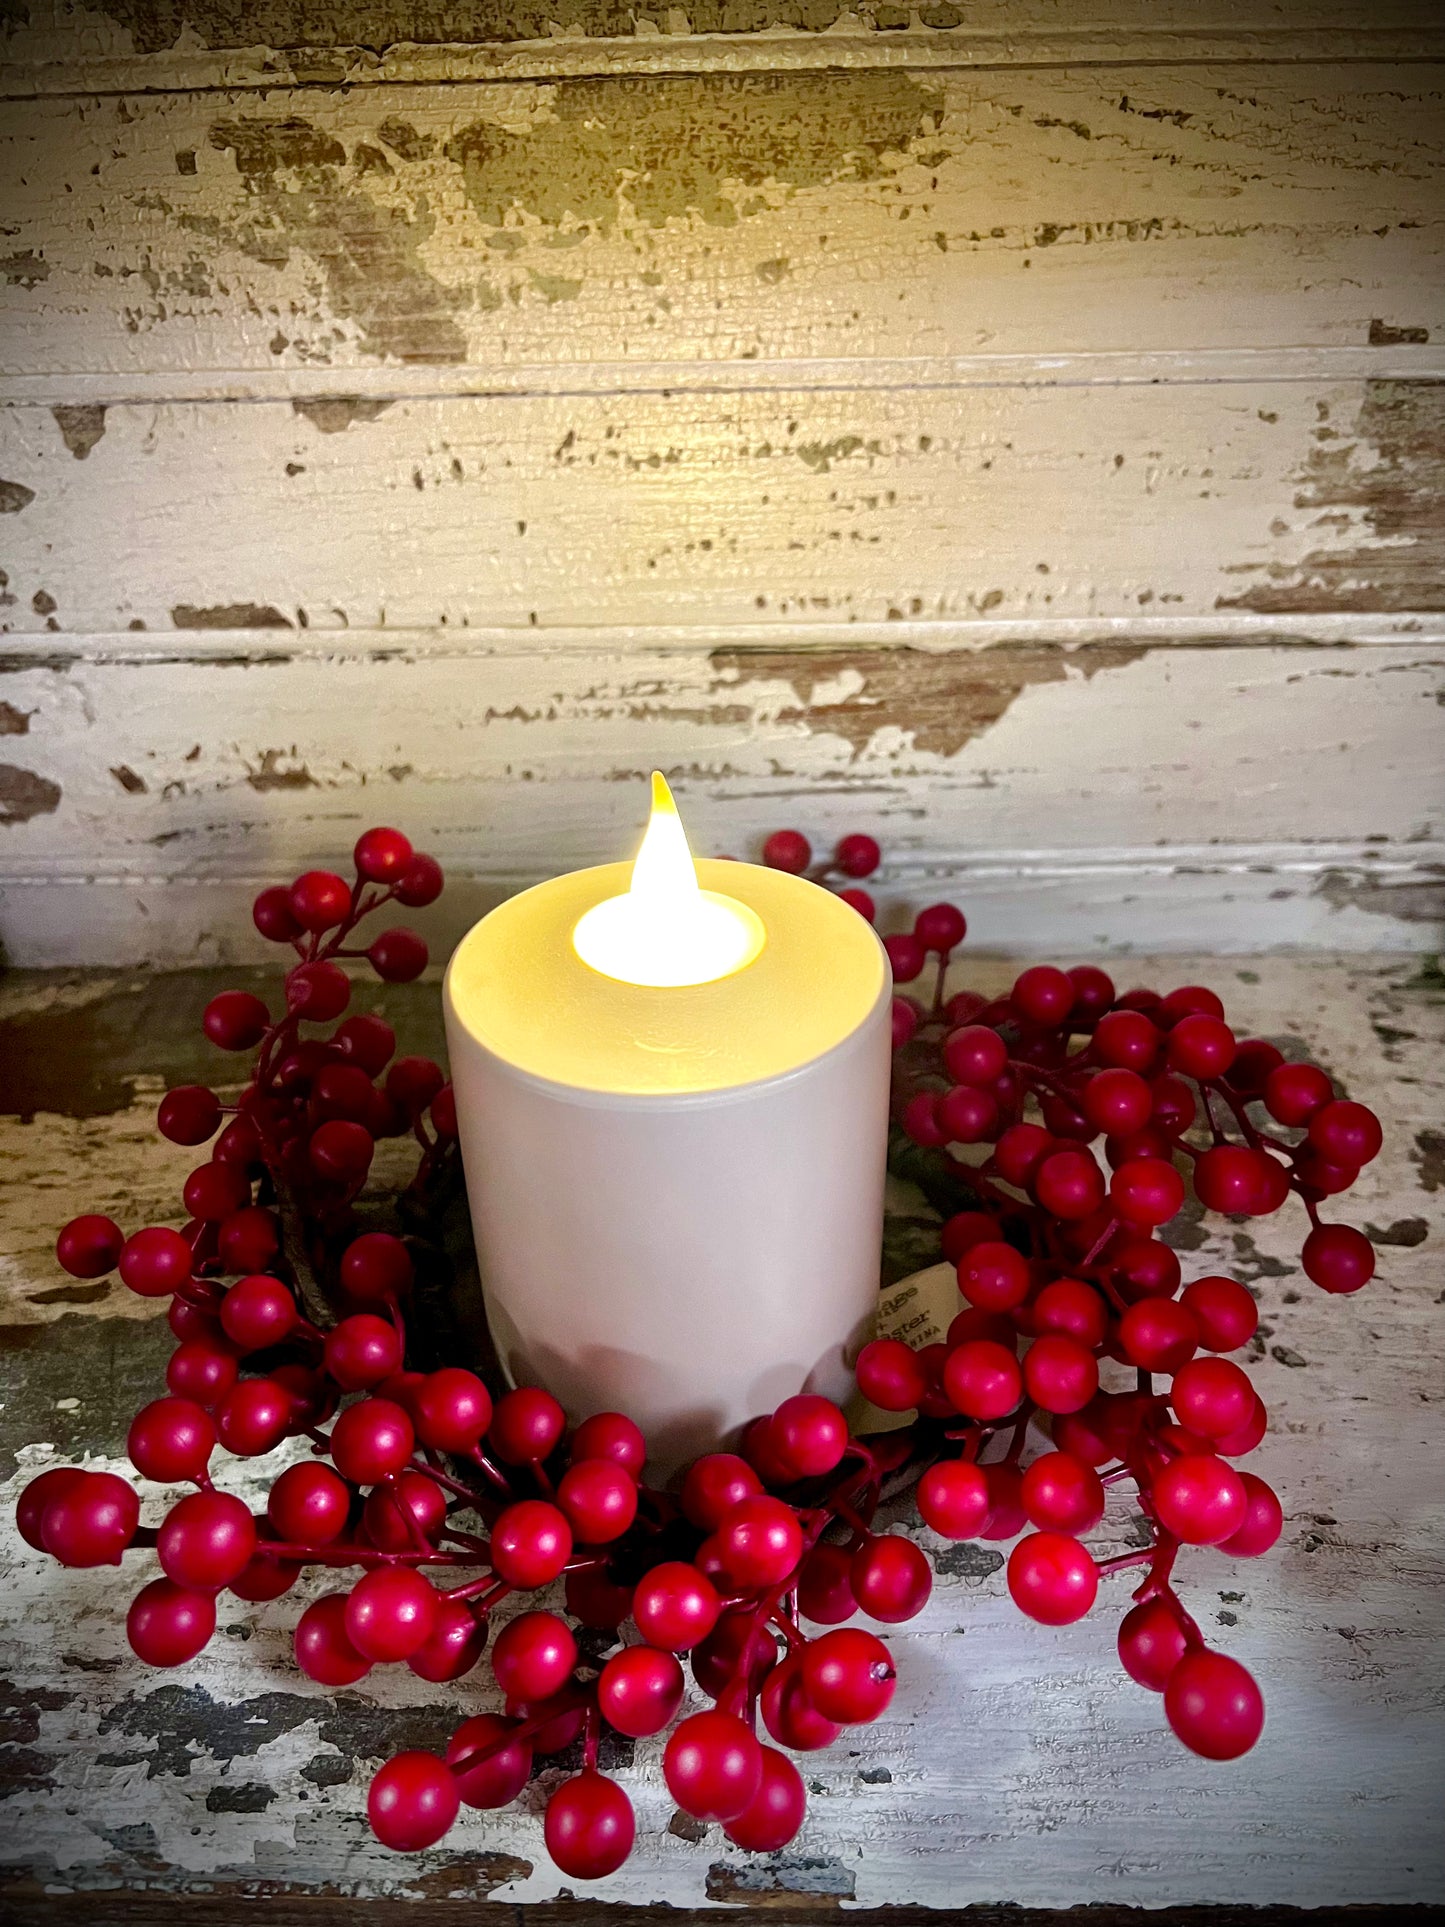 Weatherproof Berries, Matte Finish, 10" CANDLE RING